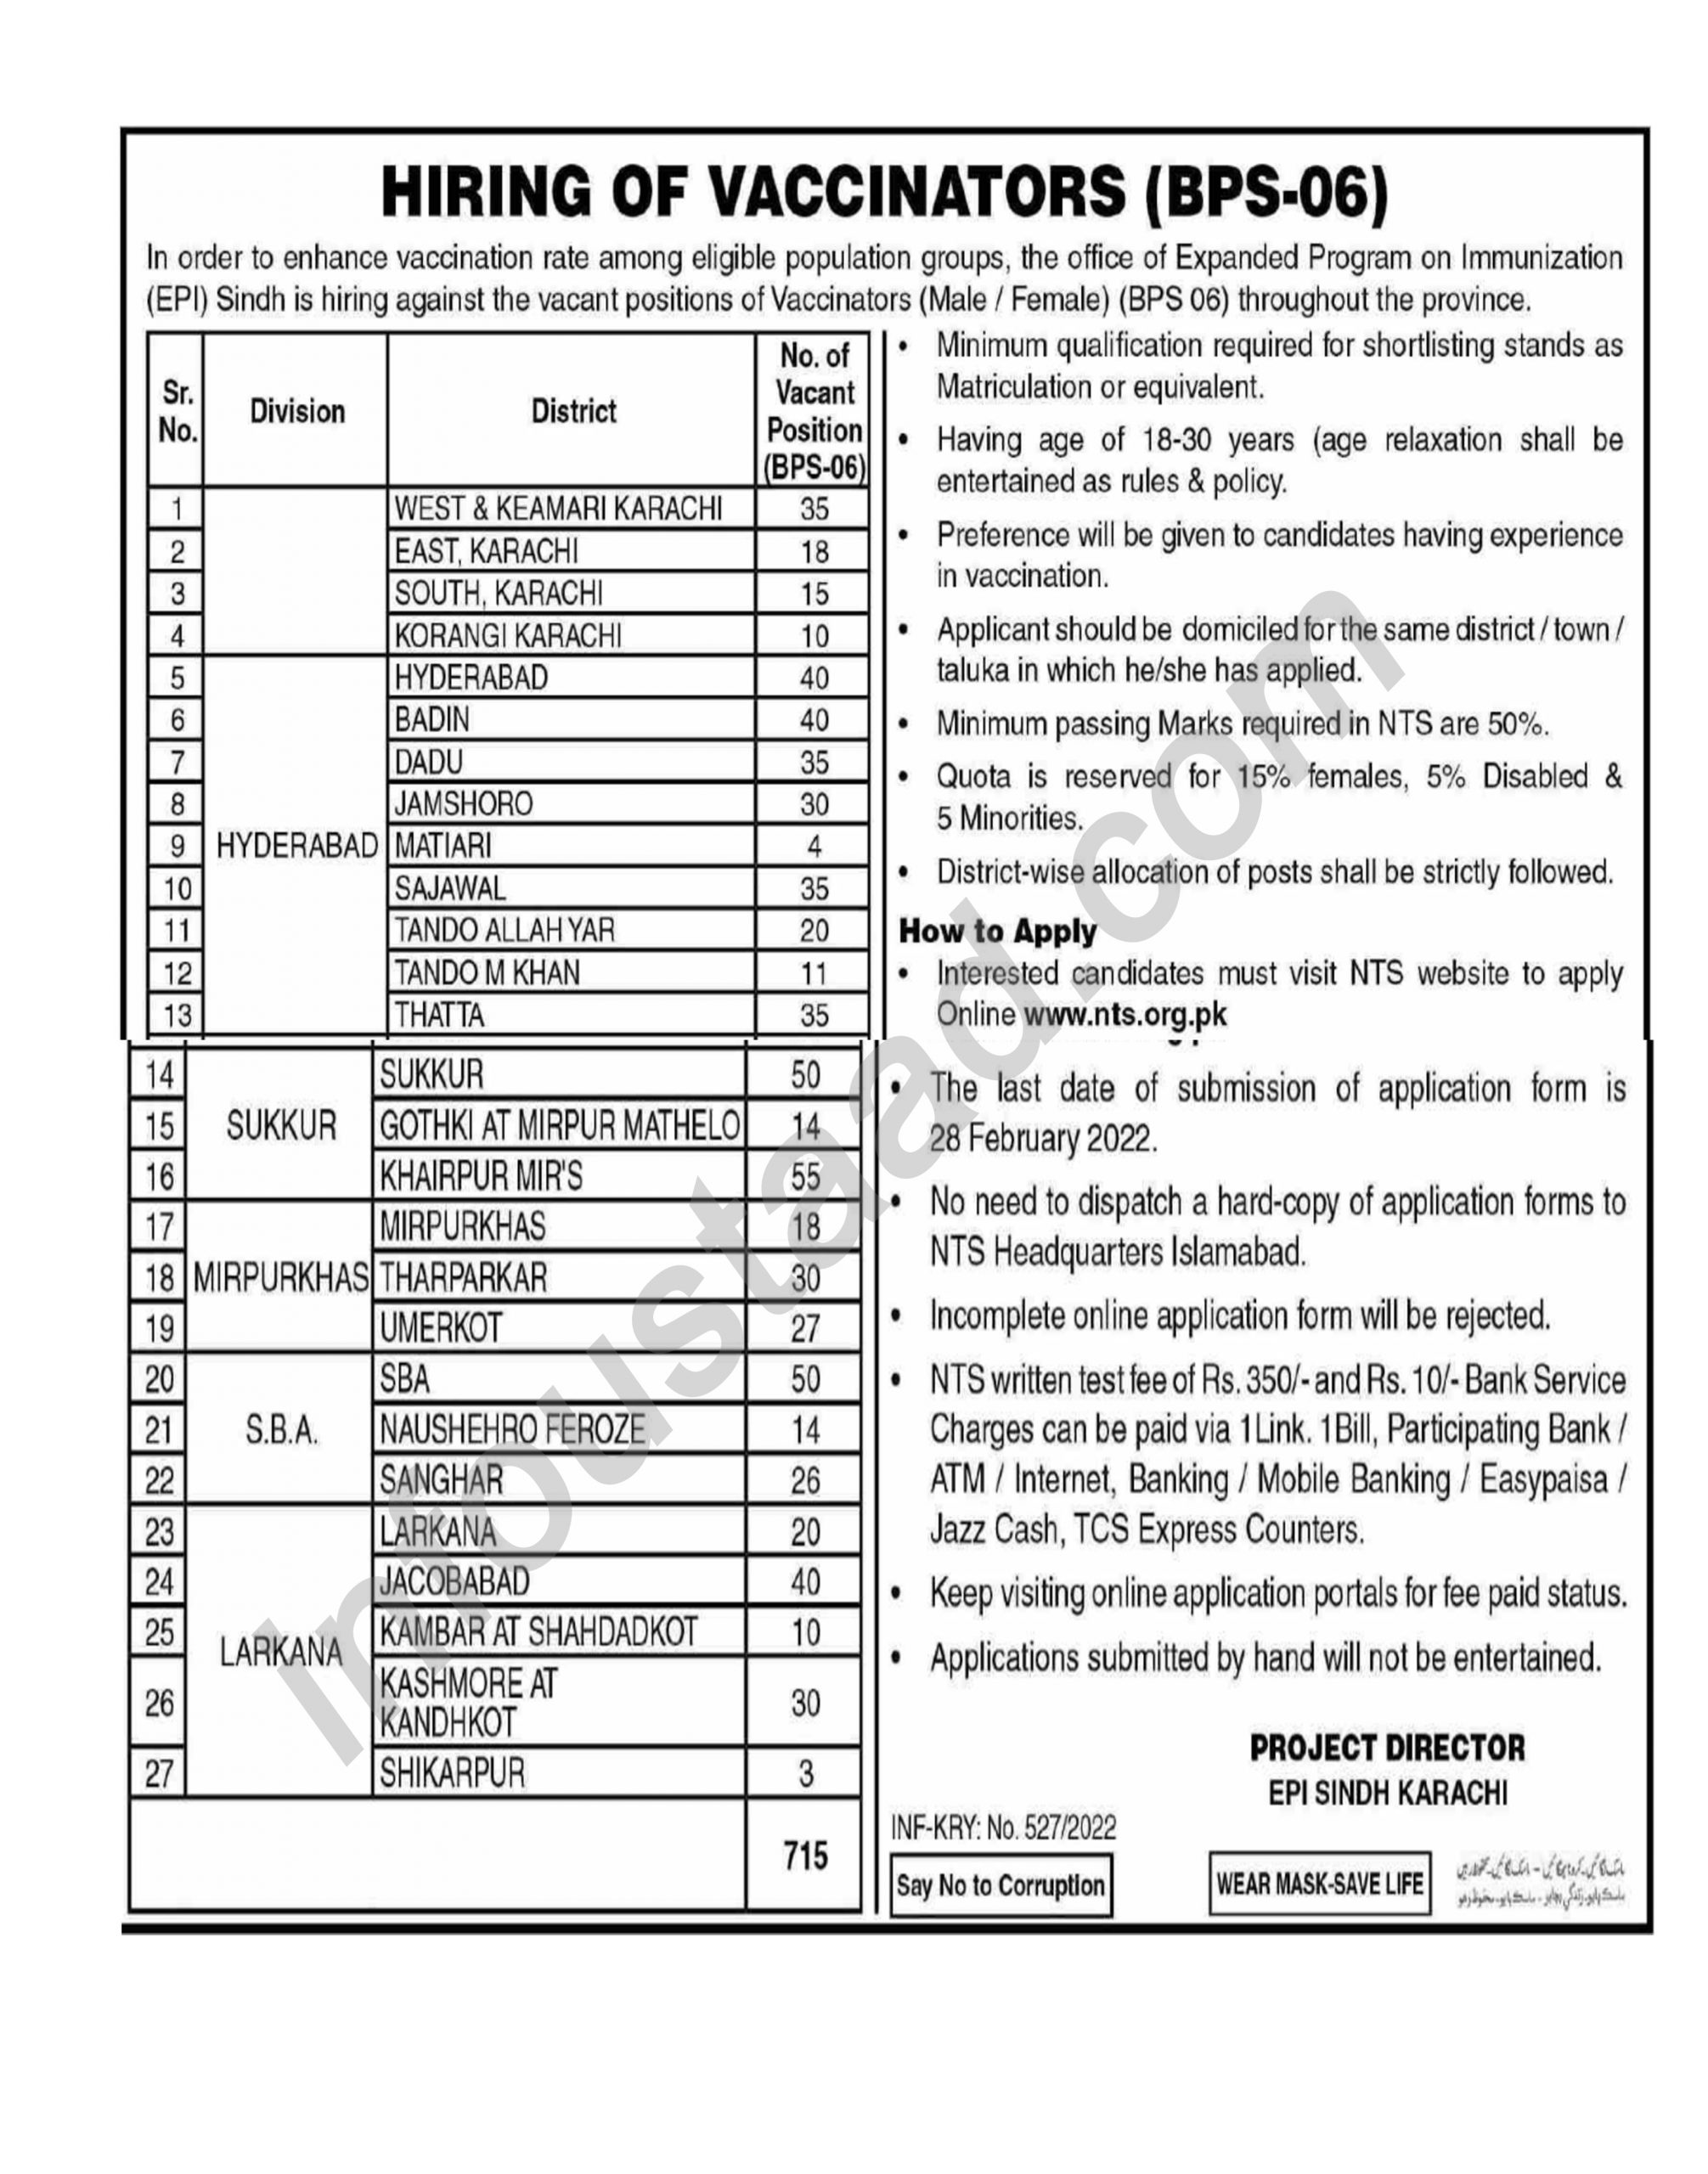 Today govt jobs in Pakistan 2022 February vaccinator jobs in sindh 2022 advertisment